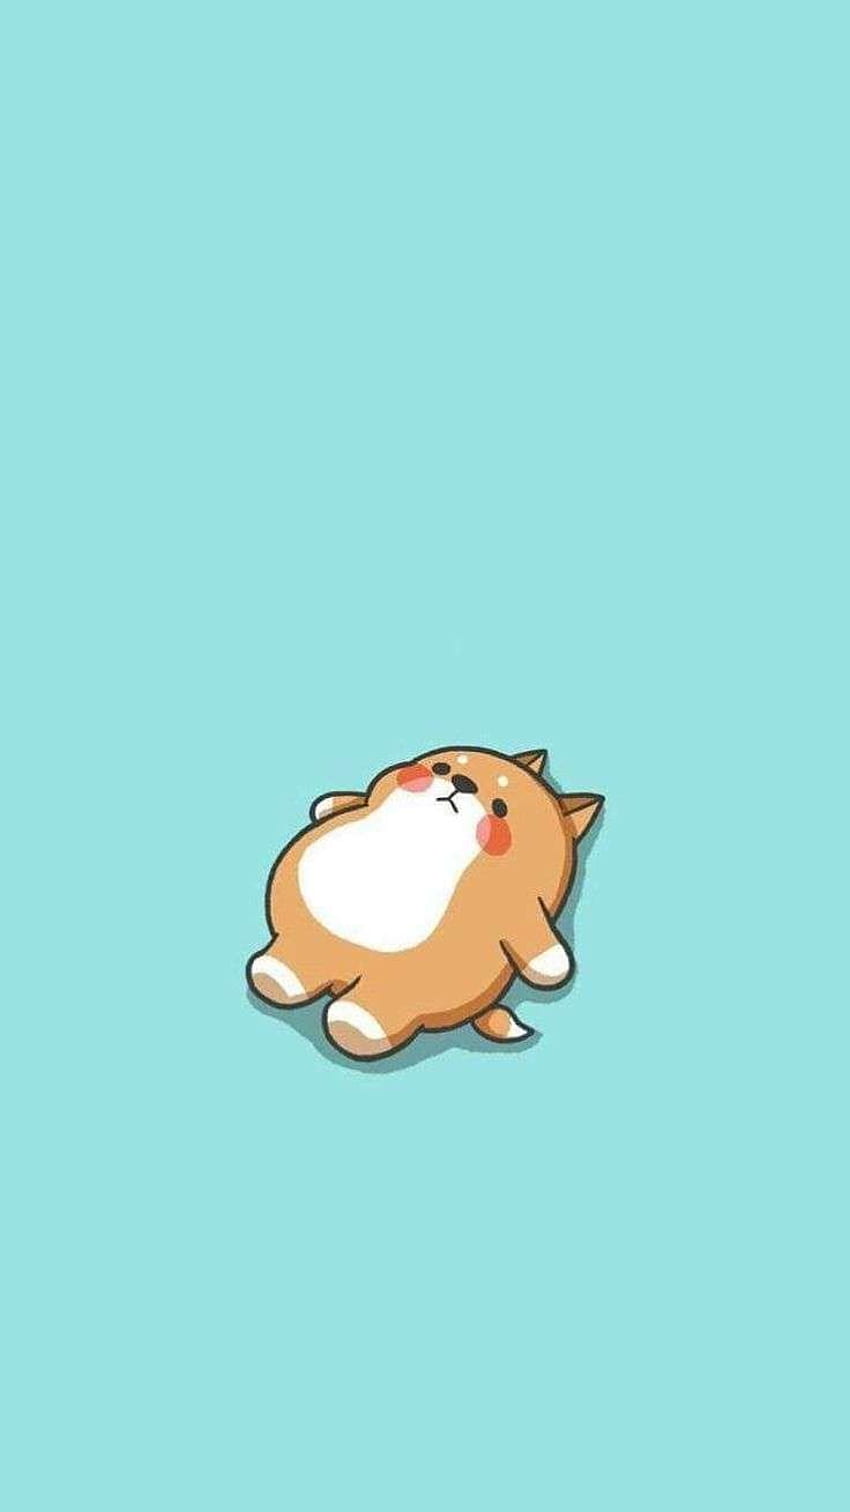 32 Anime Dog Wallpapers for iPhone and Android by Jessica Castillo